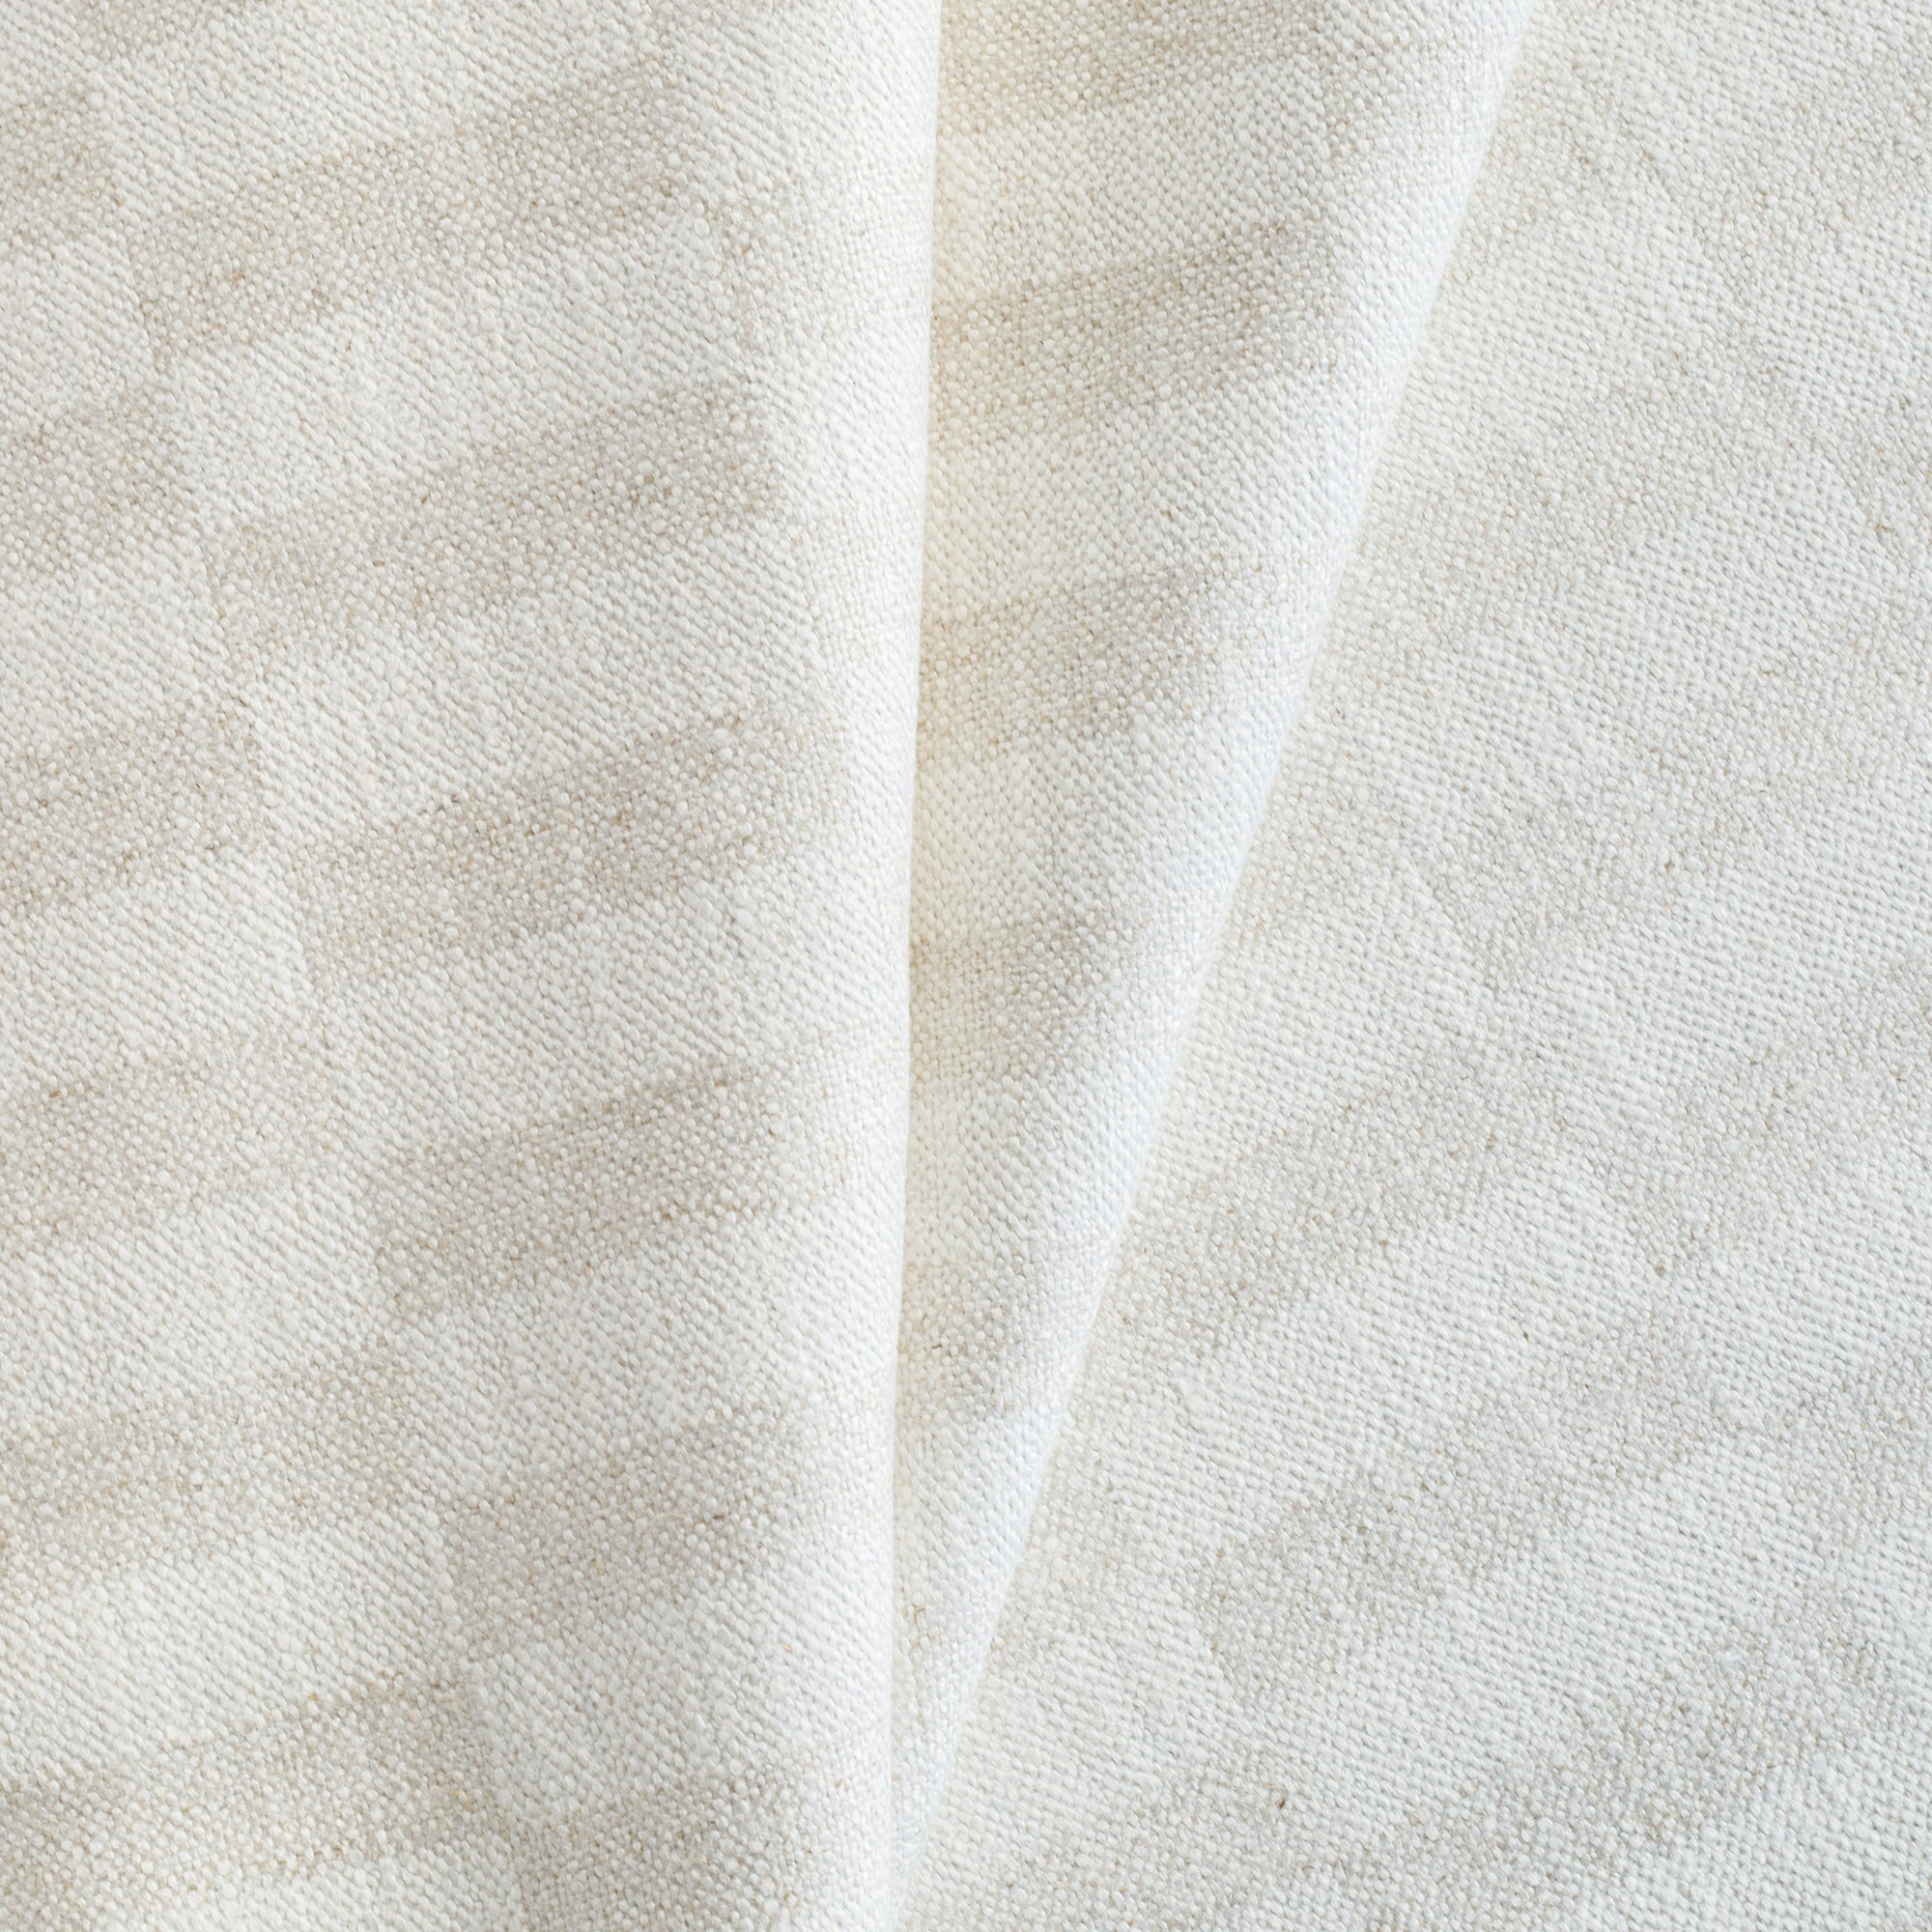 Webster Buff, a multipurpose cream and beige checkerboard patterned fabric from Tonic Living